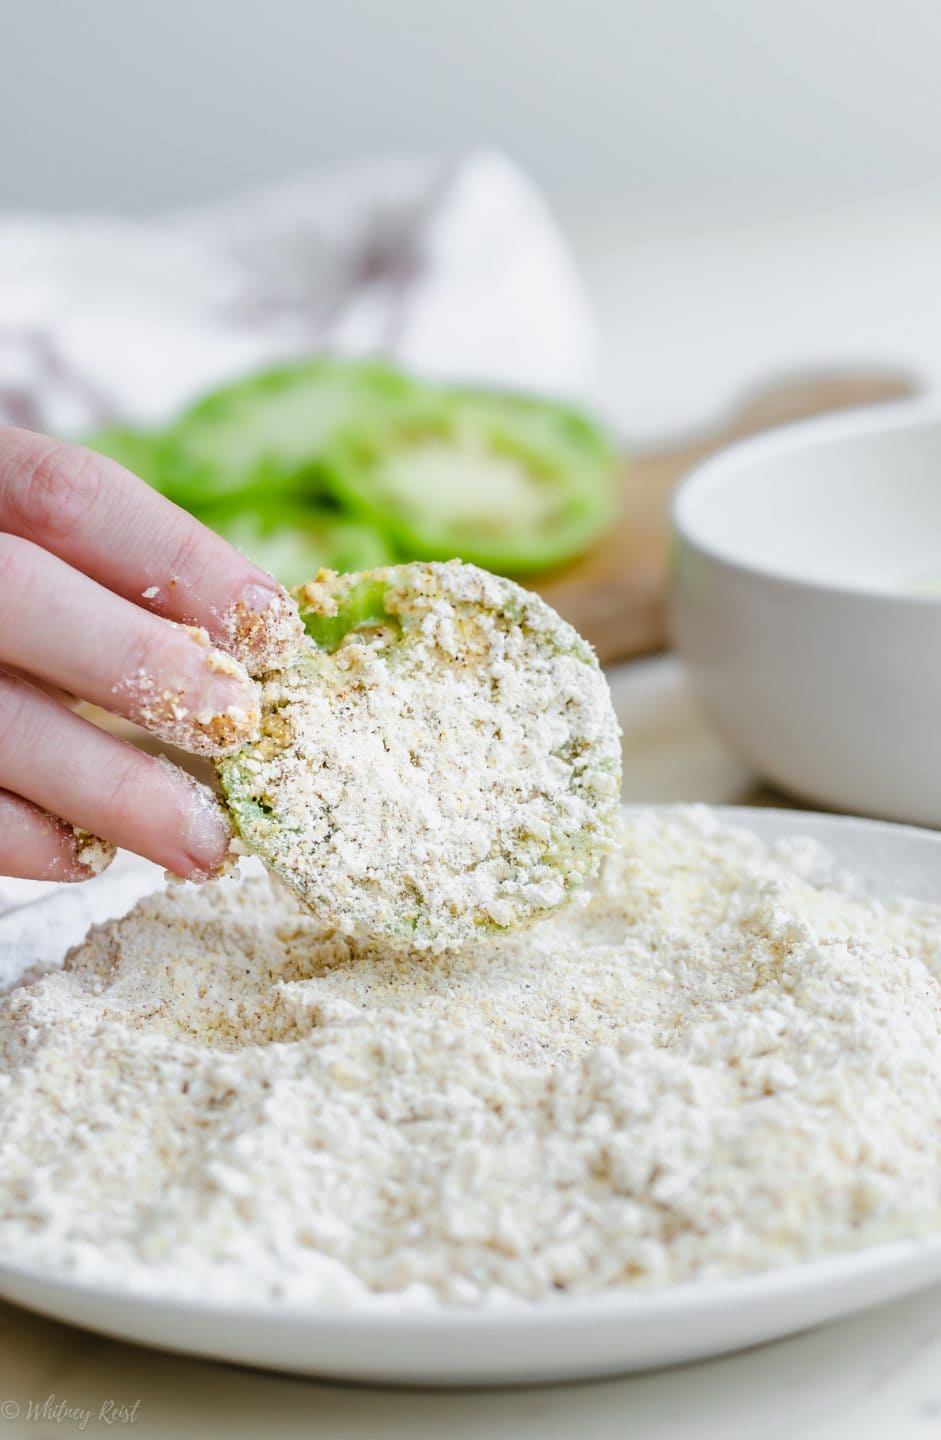 A hand dipping a sliced green tomato in a cornmeal bread crumb mixture.